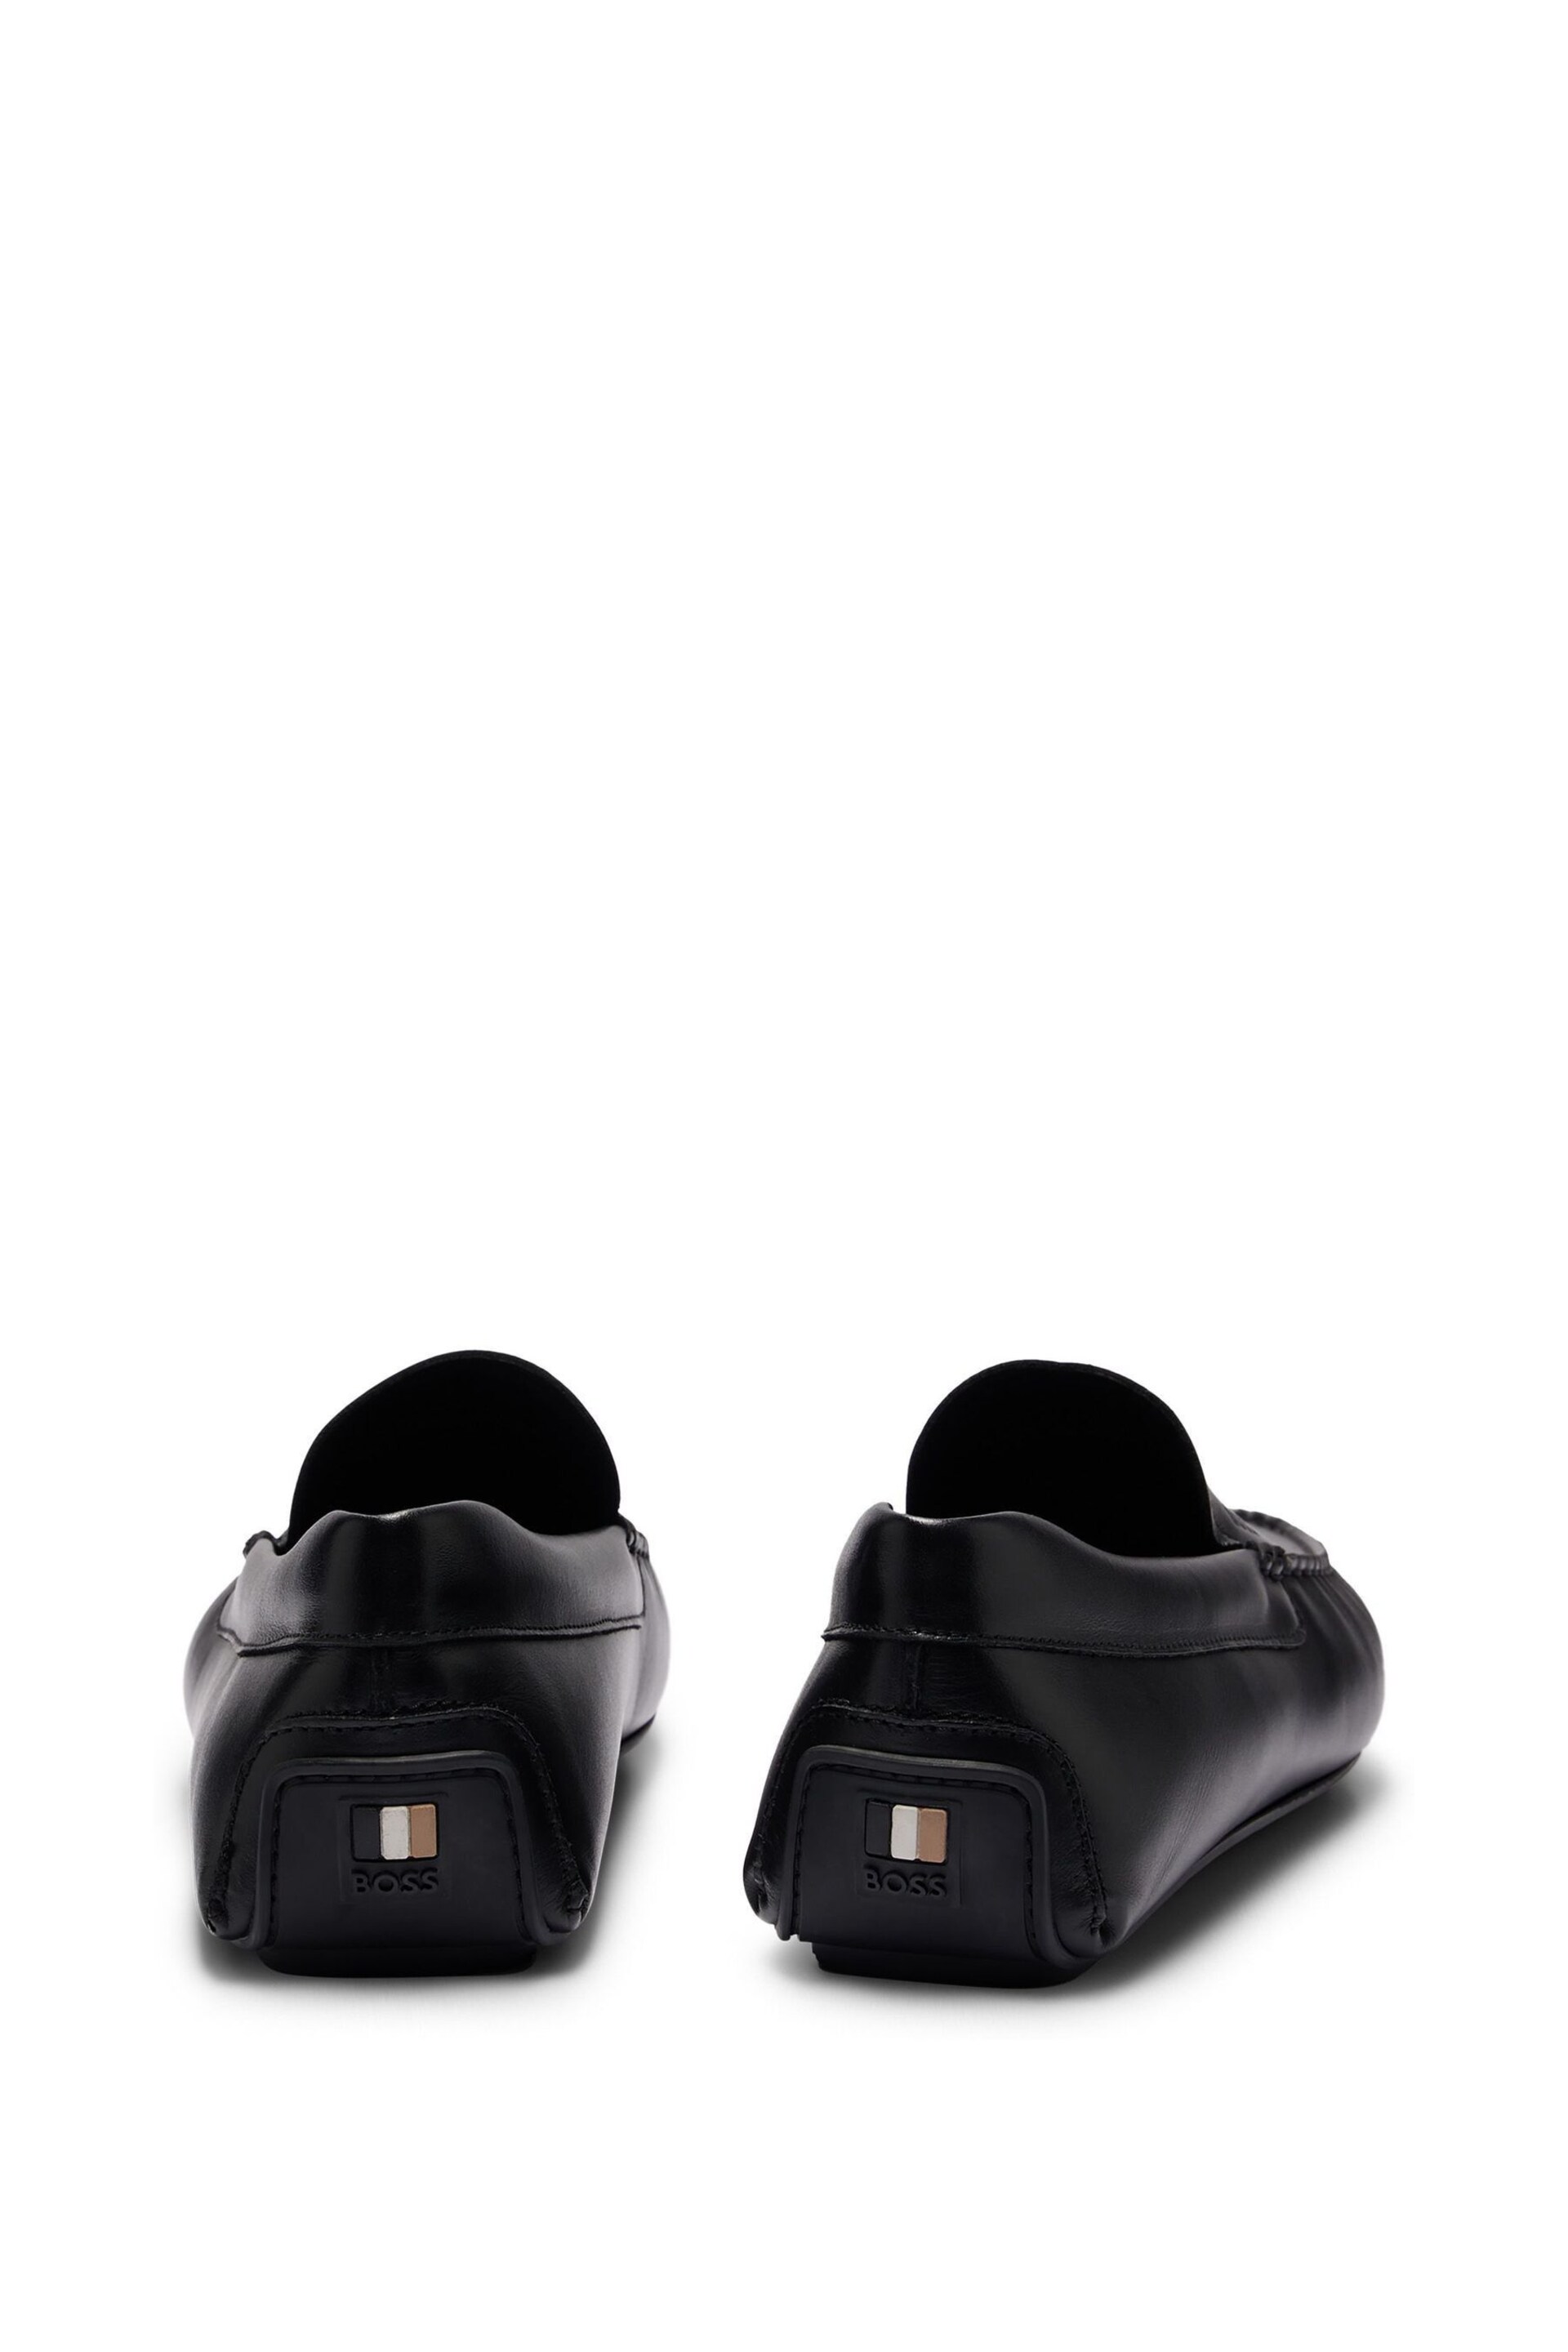 BOSS Black Nappa-Leather Moccasins With Driver Sole And Full Lining - Image 3 of 5